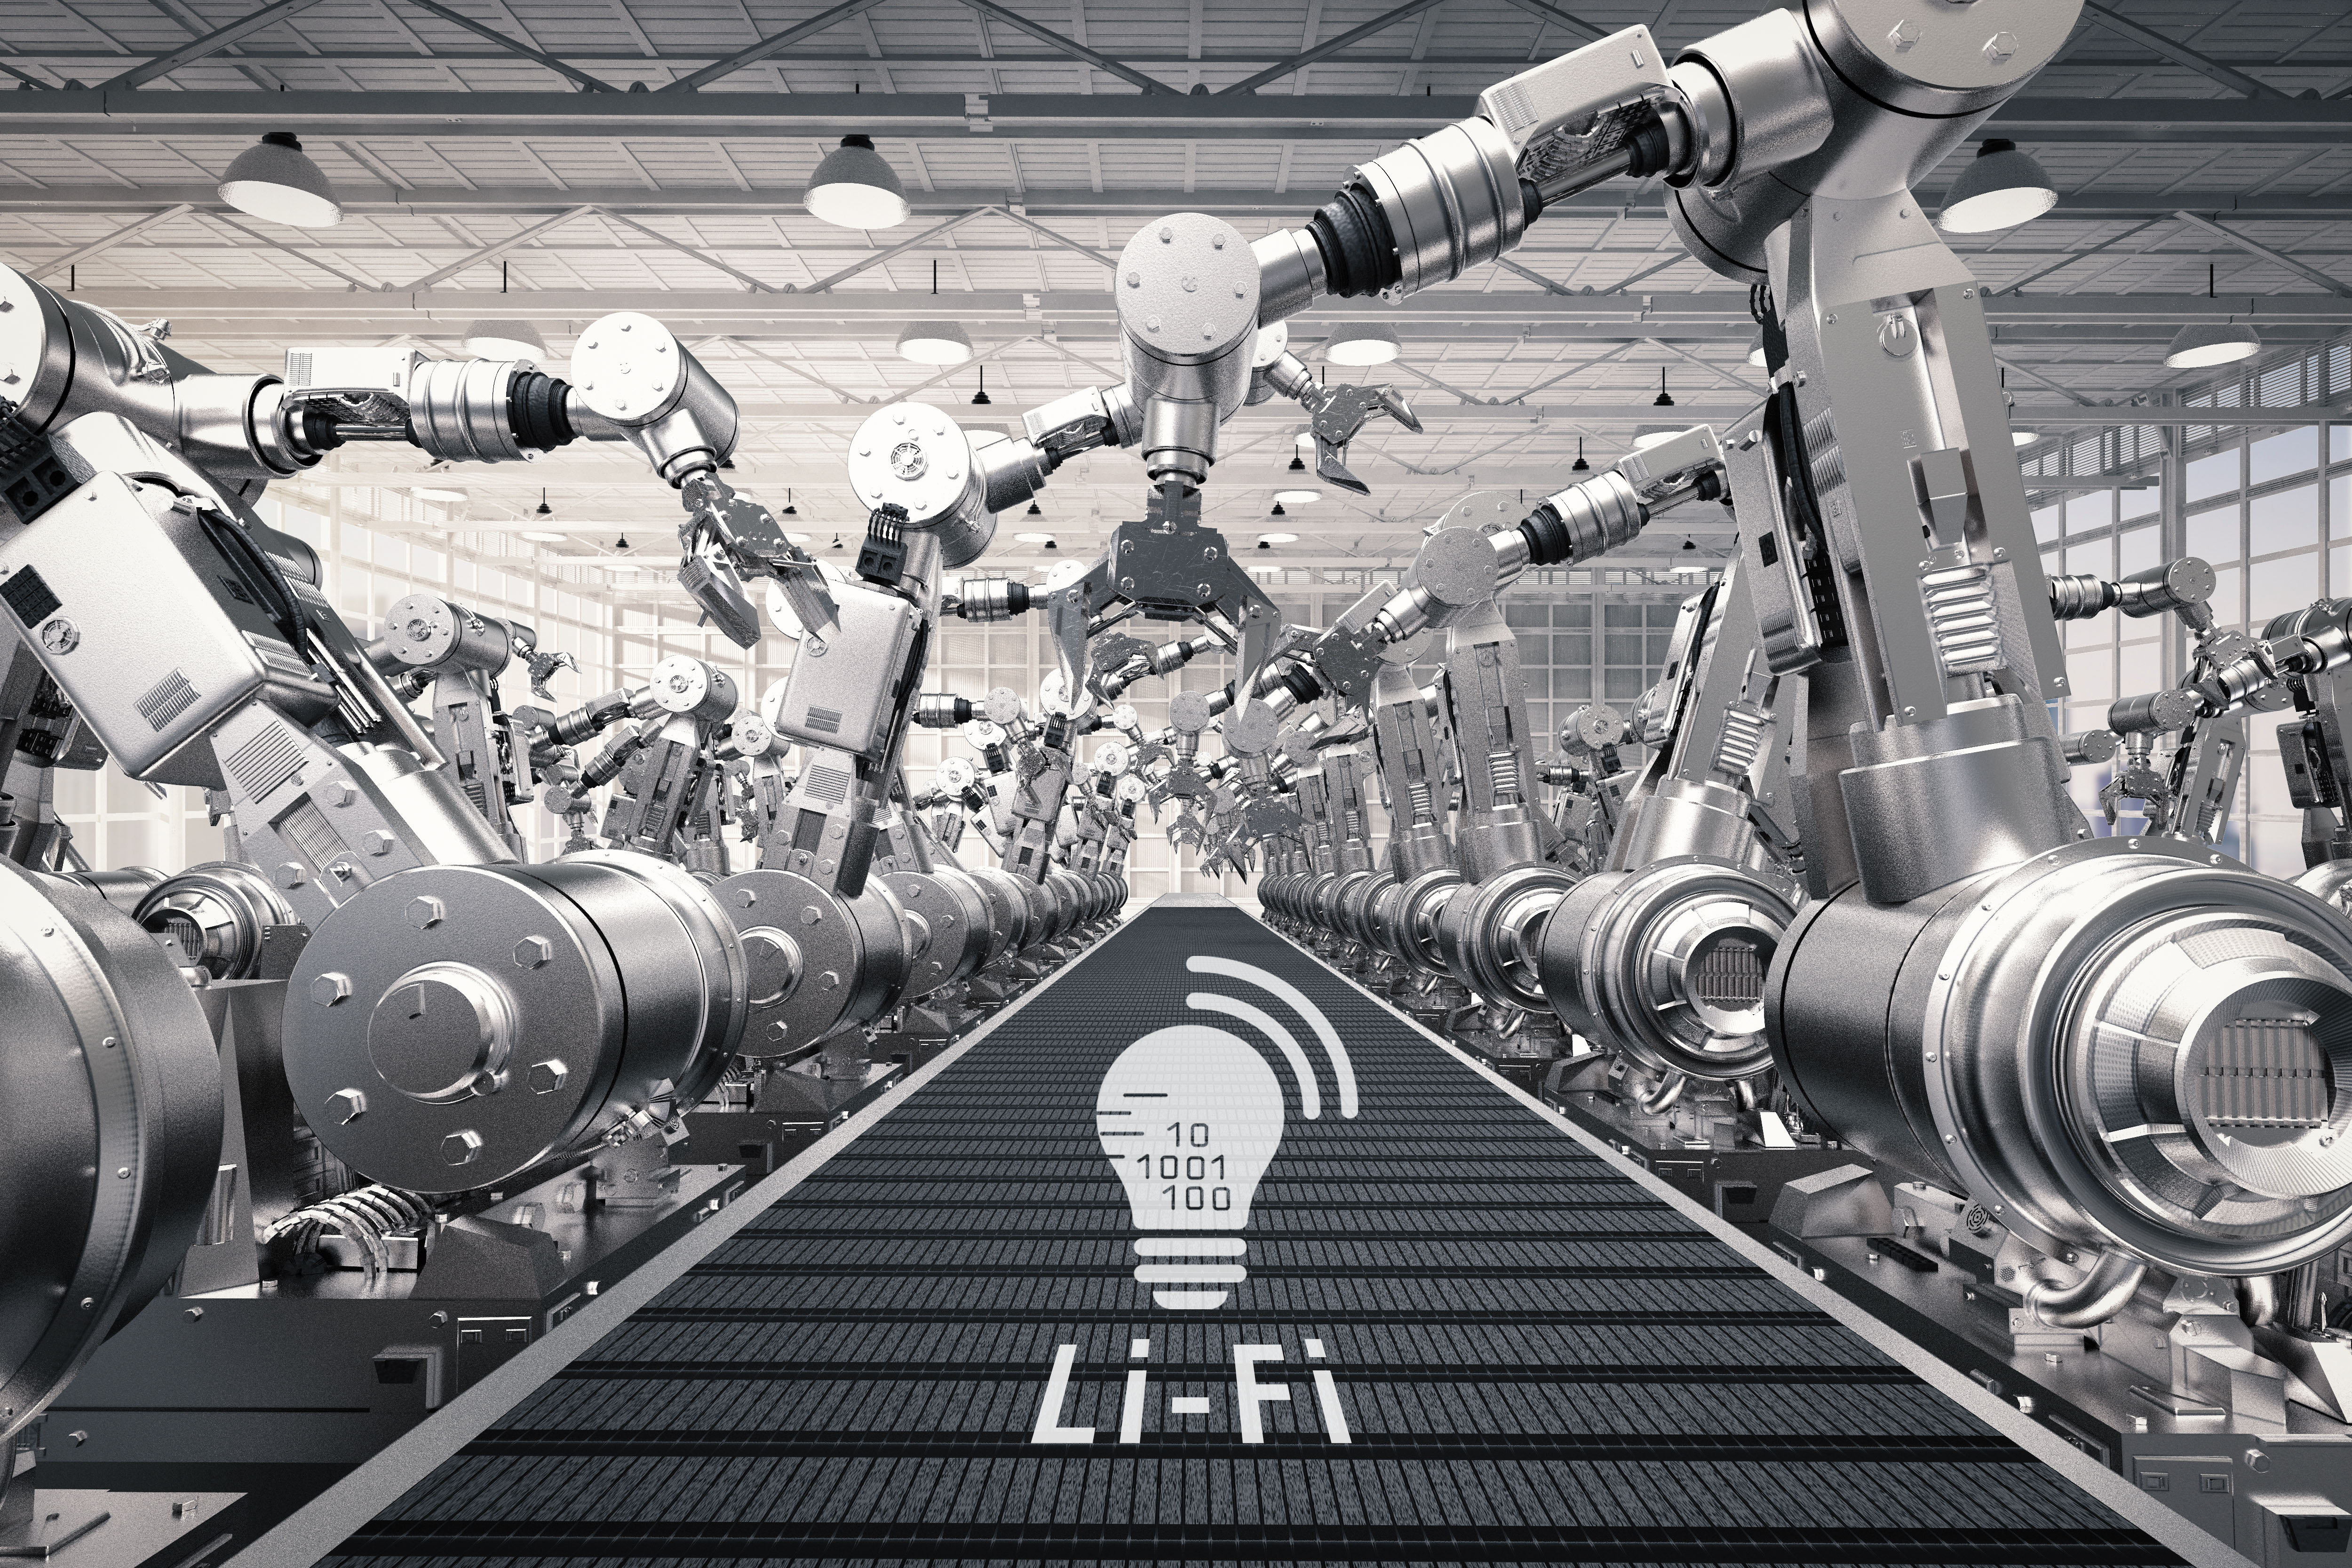 Li-Fi, the wireless transmission of data via light, provides real-time communication for a variety of applications. 